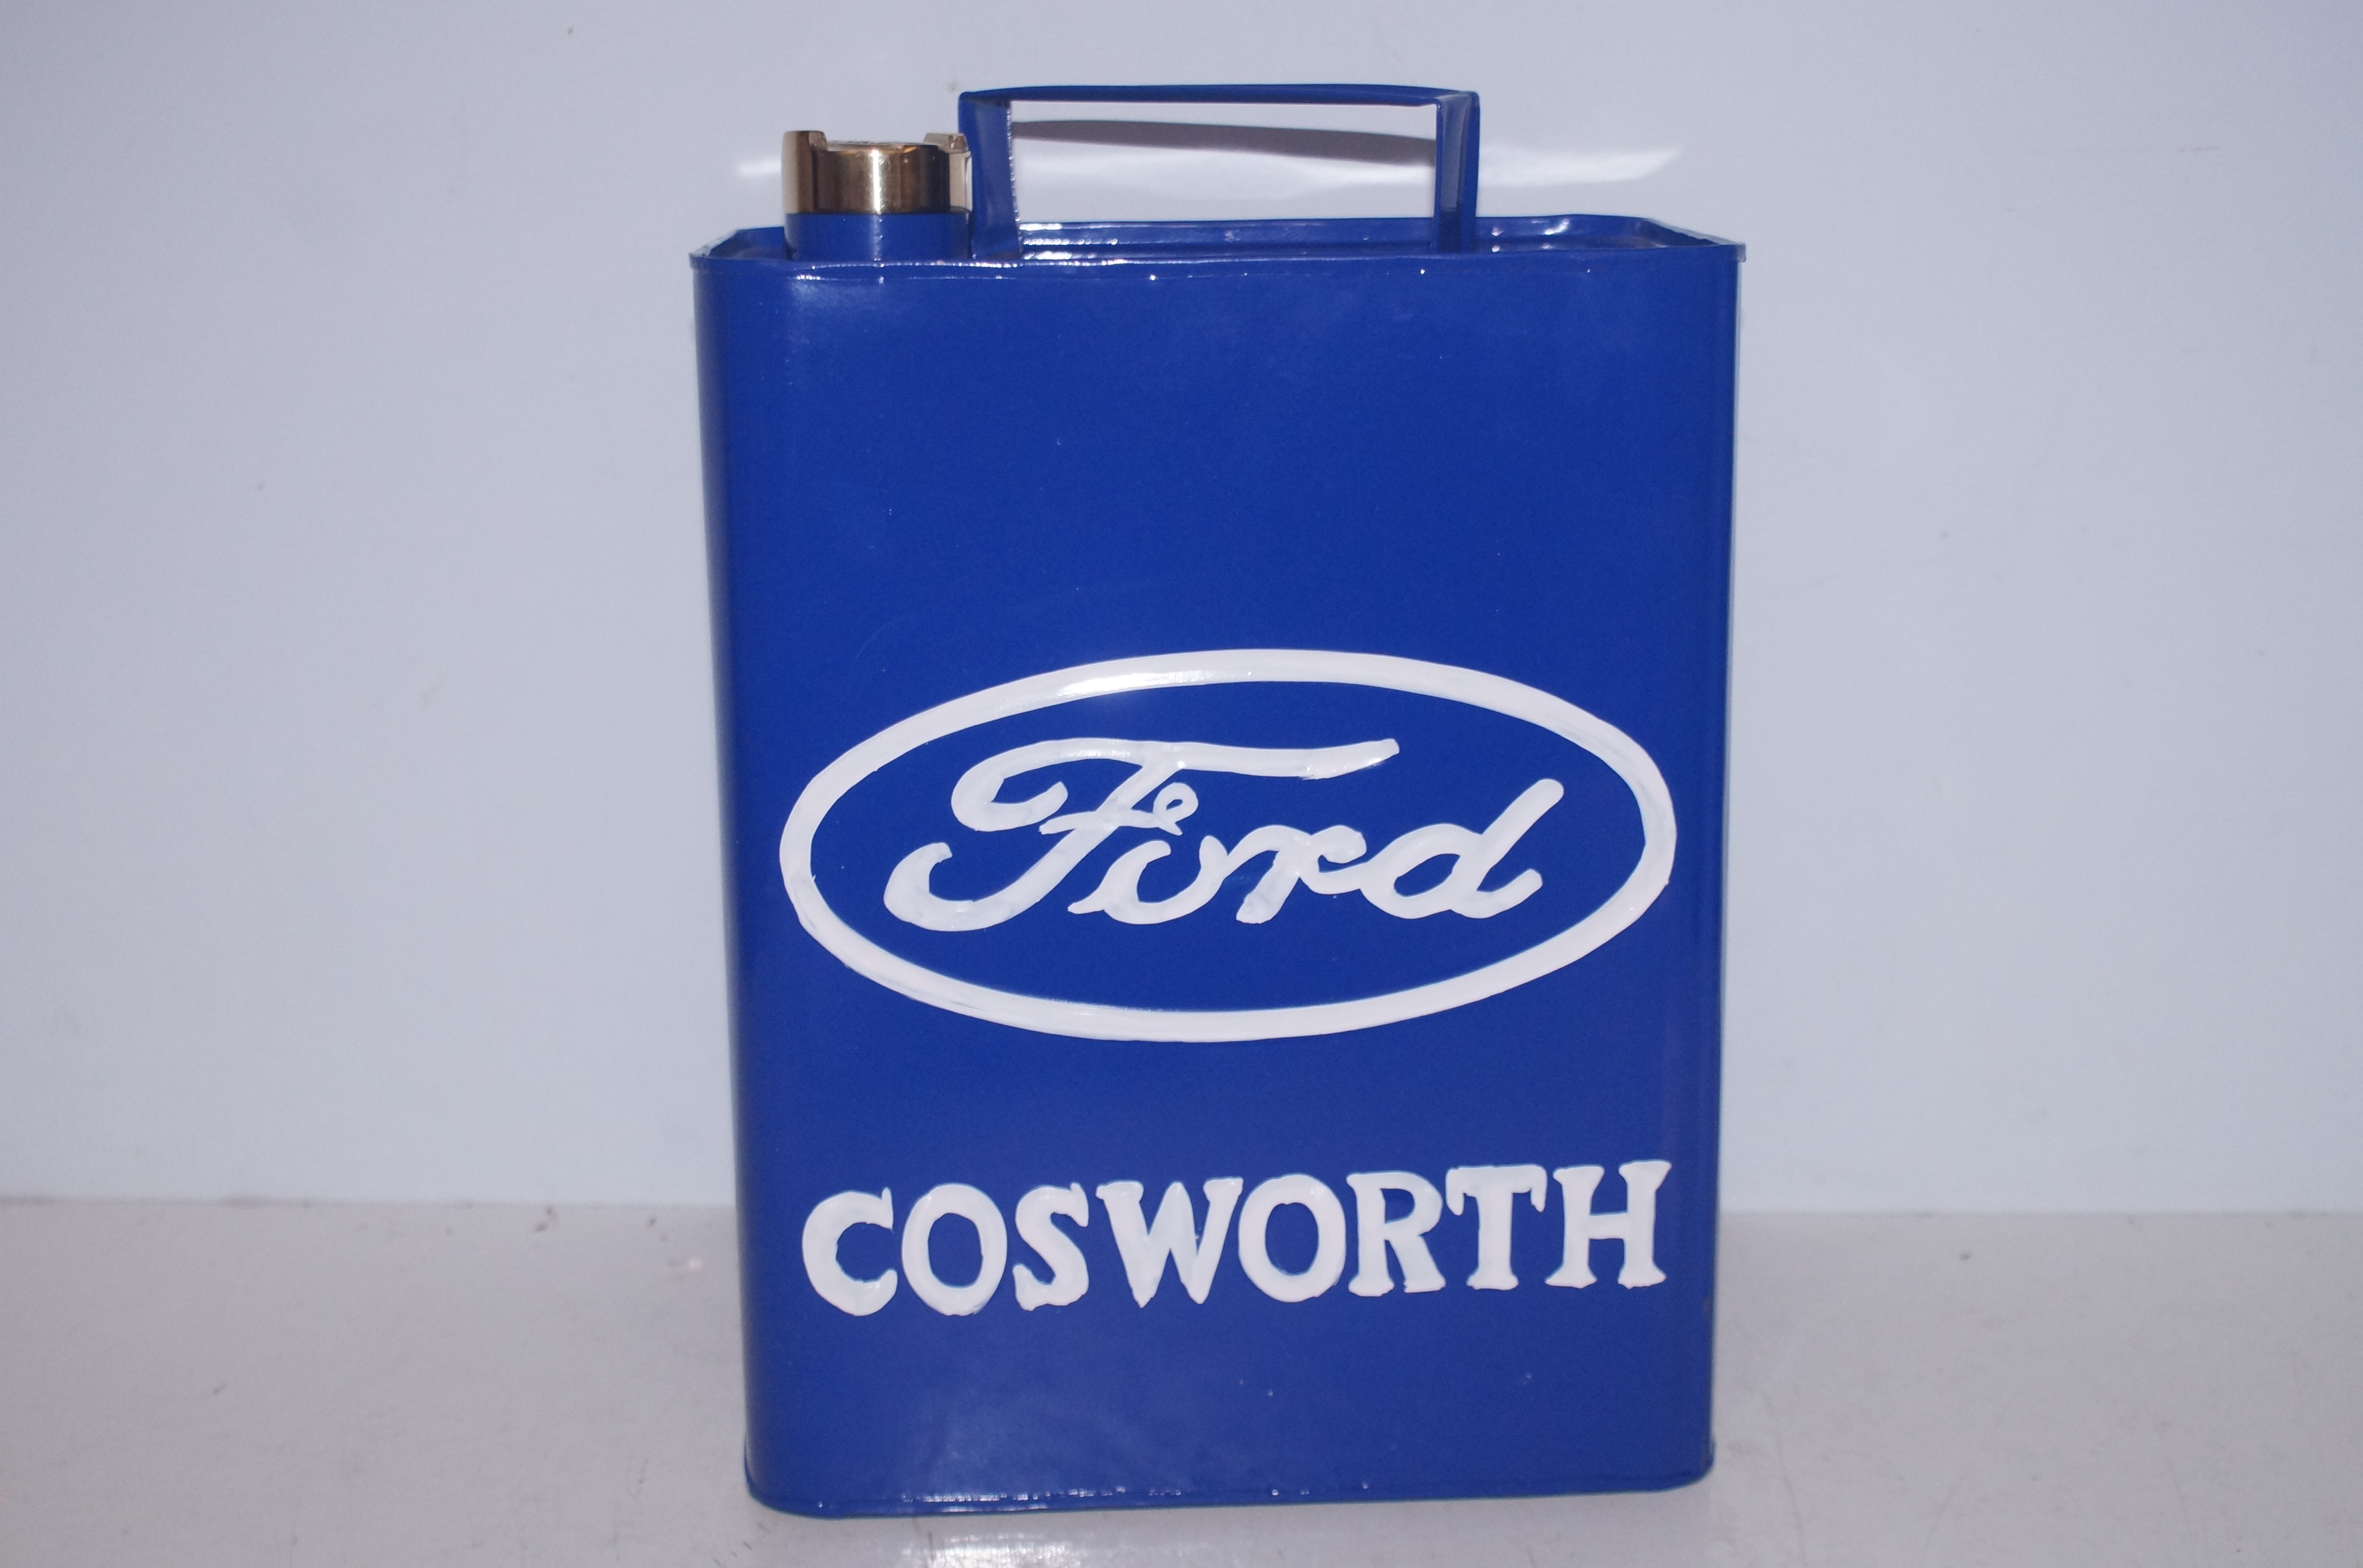 Ford Cosworth petrol can